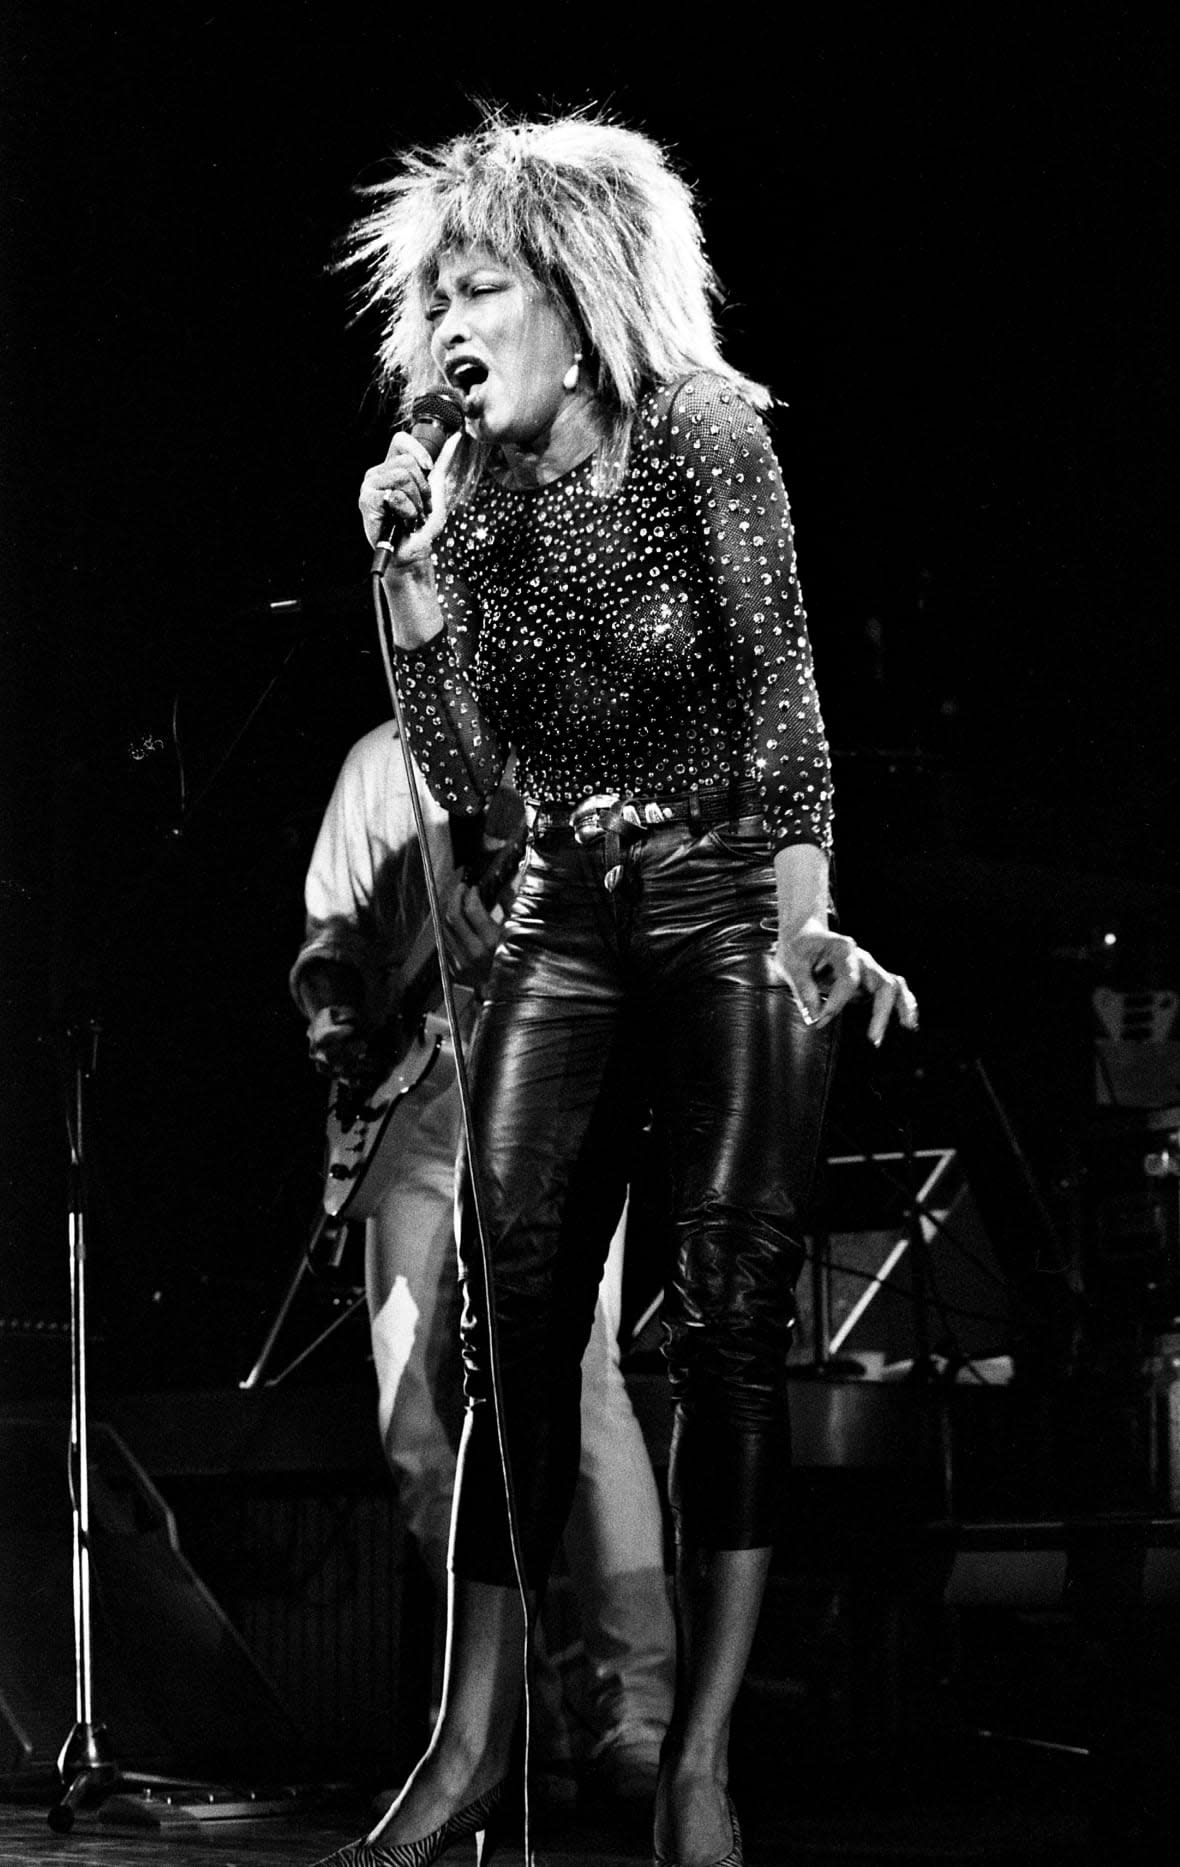 Tina Turner performs for a sold-out crowd at Municipal Auditorium on May 22, 1984, in Nashville, Tennessee. (Photo by Callie Shell/The Tennessean via USA TODAY NETWORK)